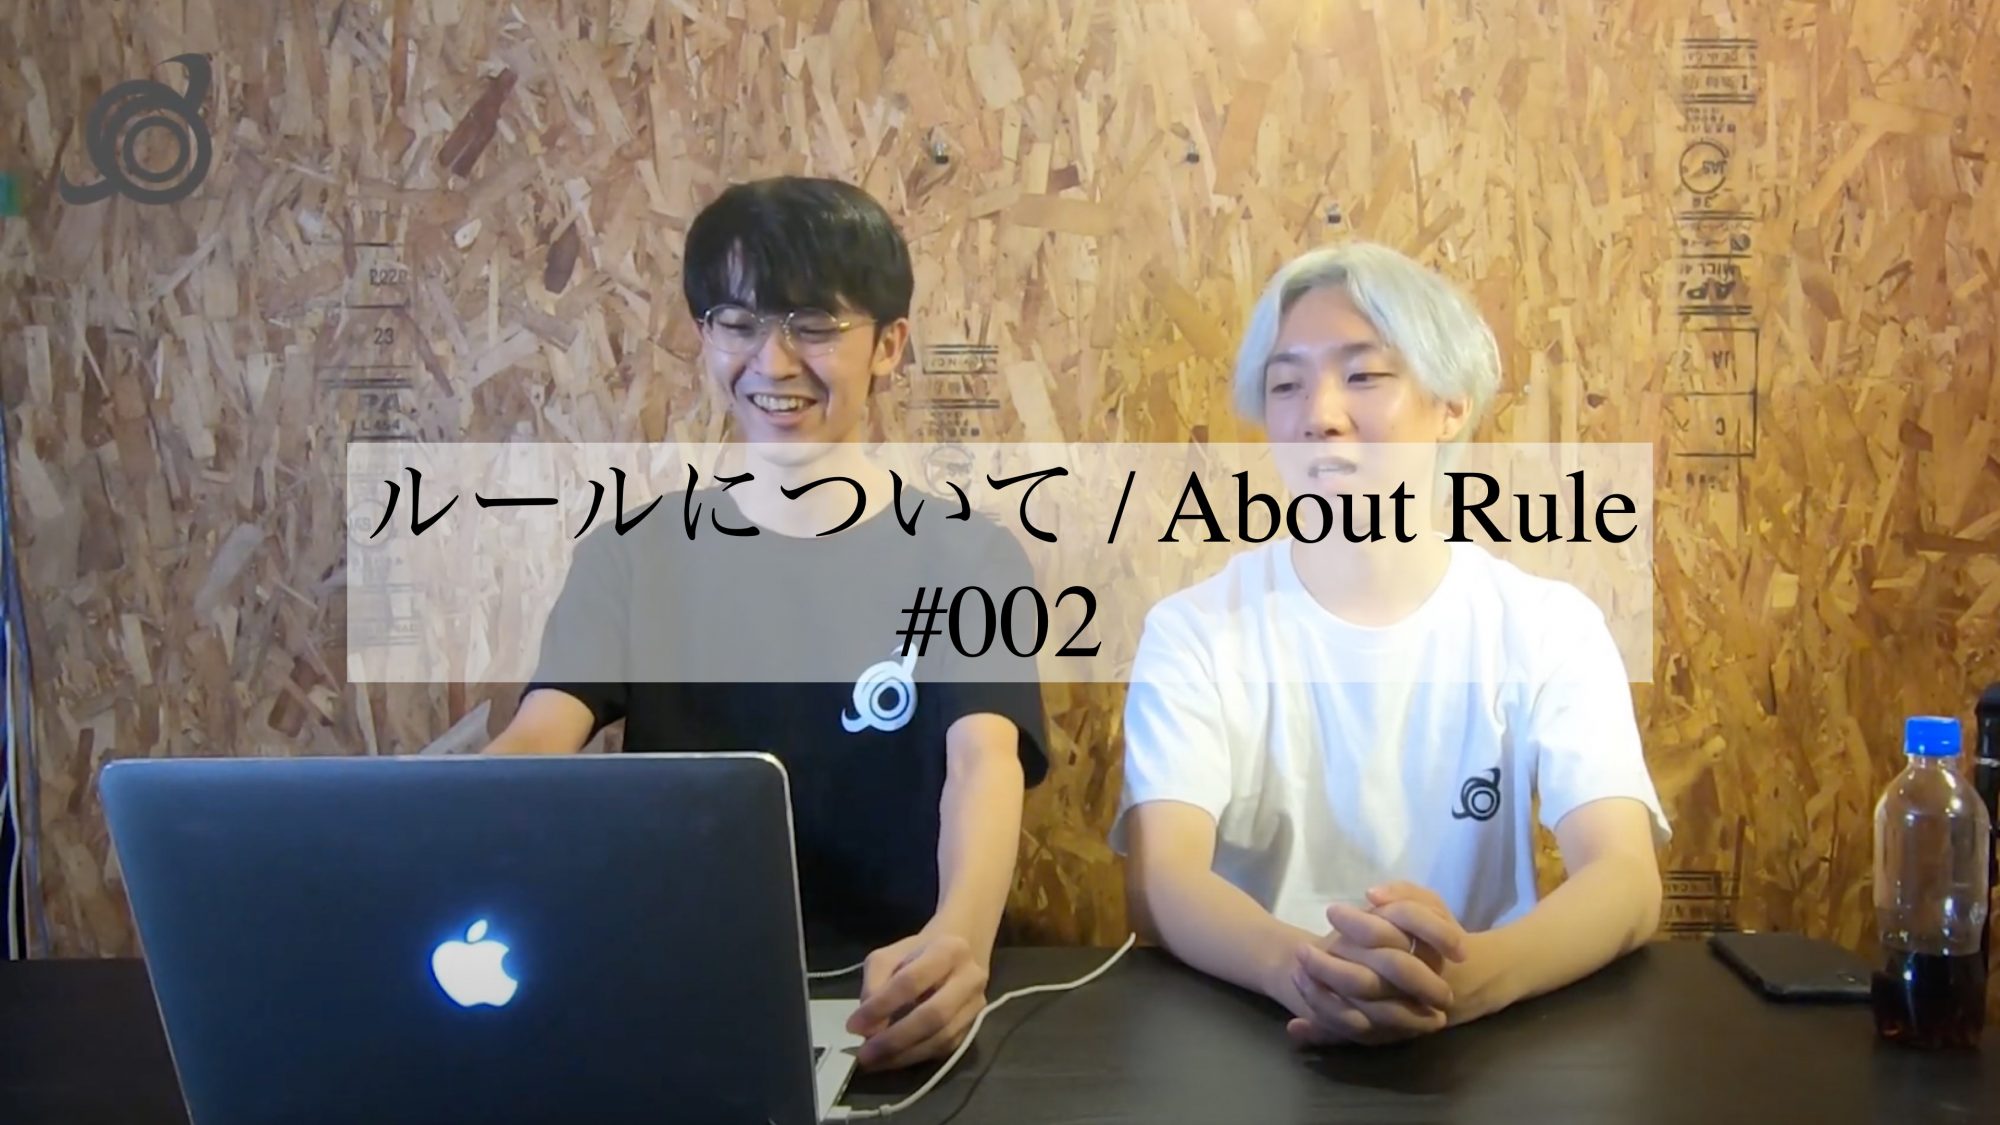 #JYYCIO YouTube Channel “ルールについて / About Rule #002”